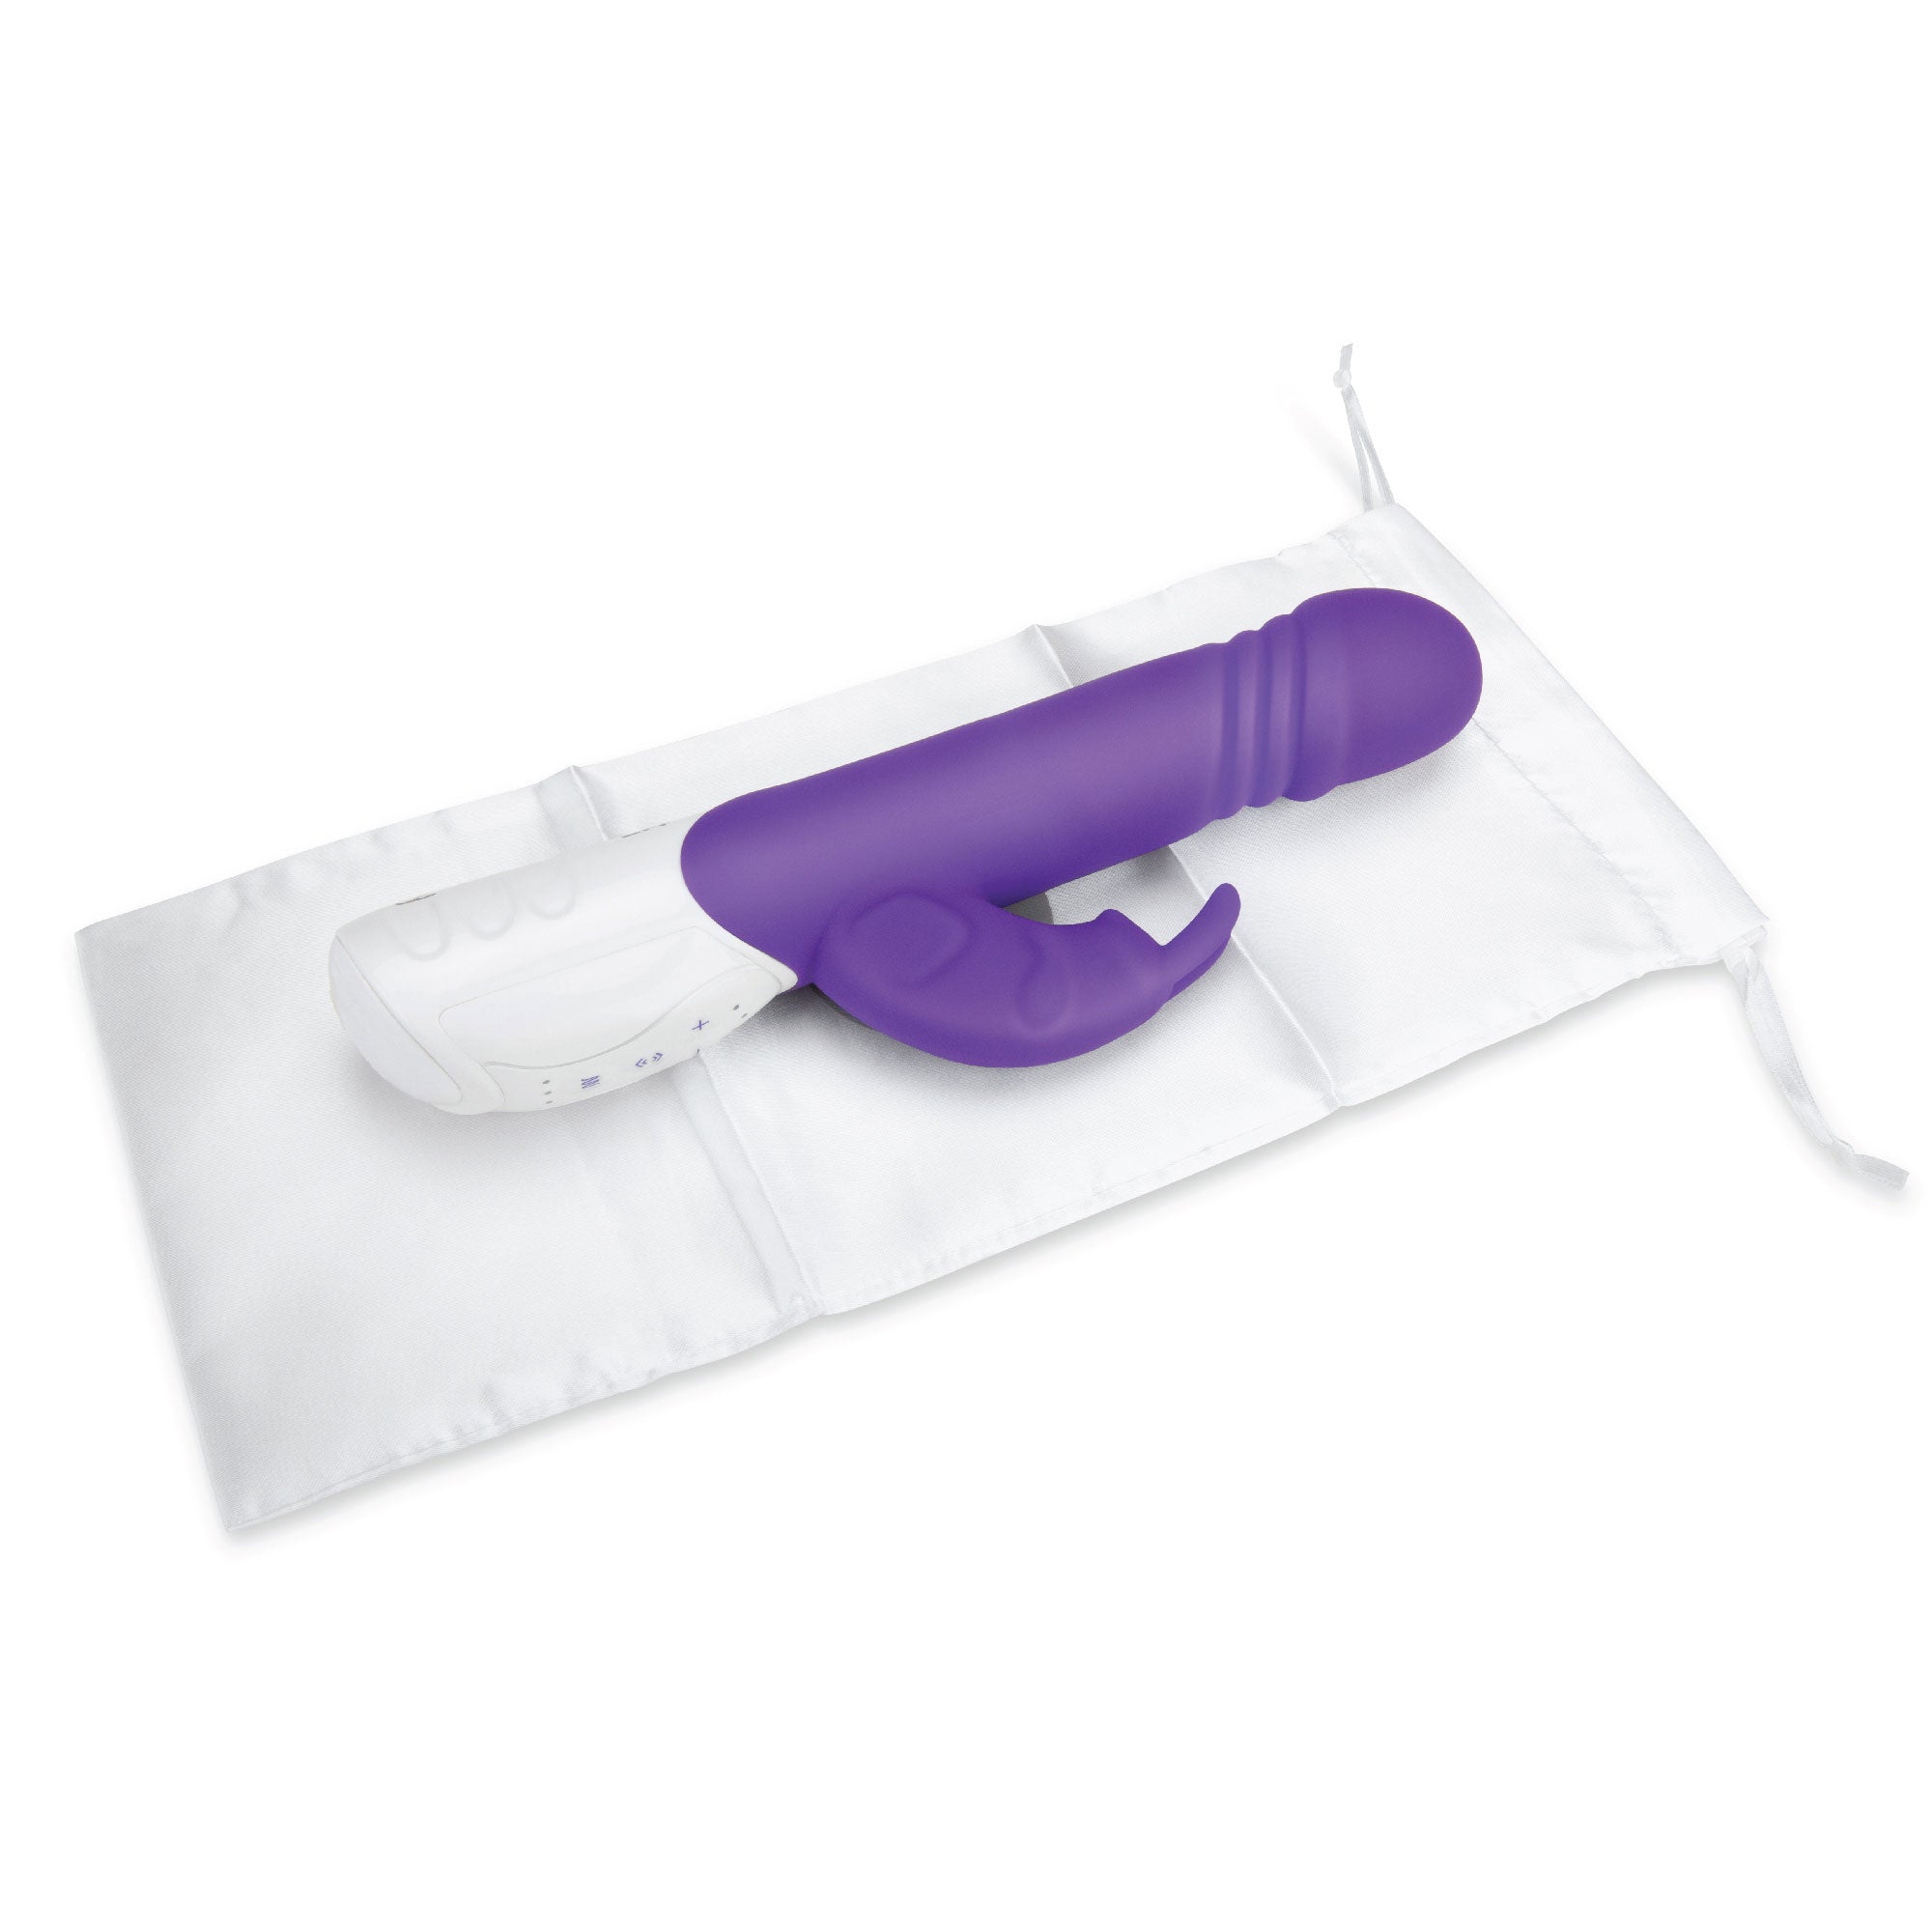 Rabbit Essentials Thrusting Rabbit Vibrator with Throbbing Shaft in Purple with Storage Pouch at glastoy.com